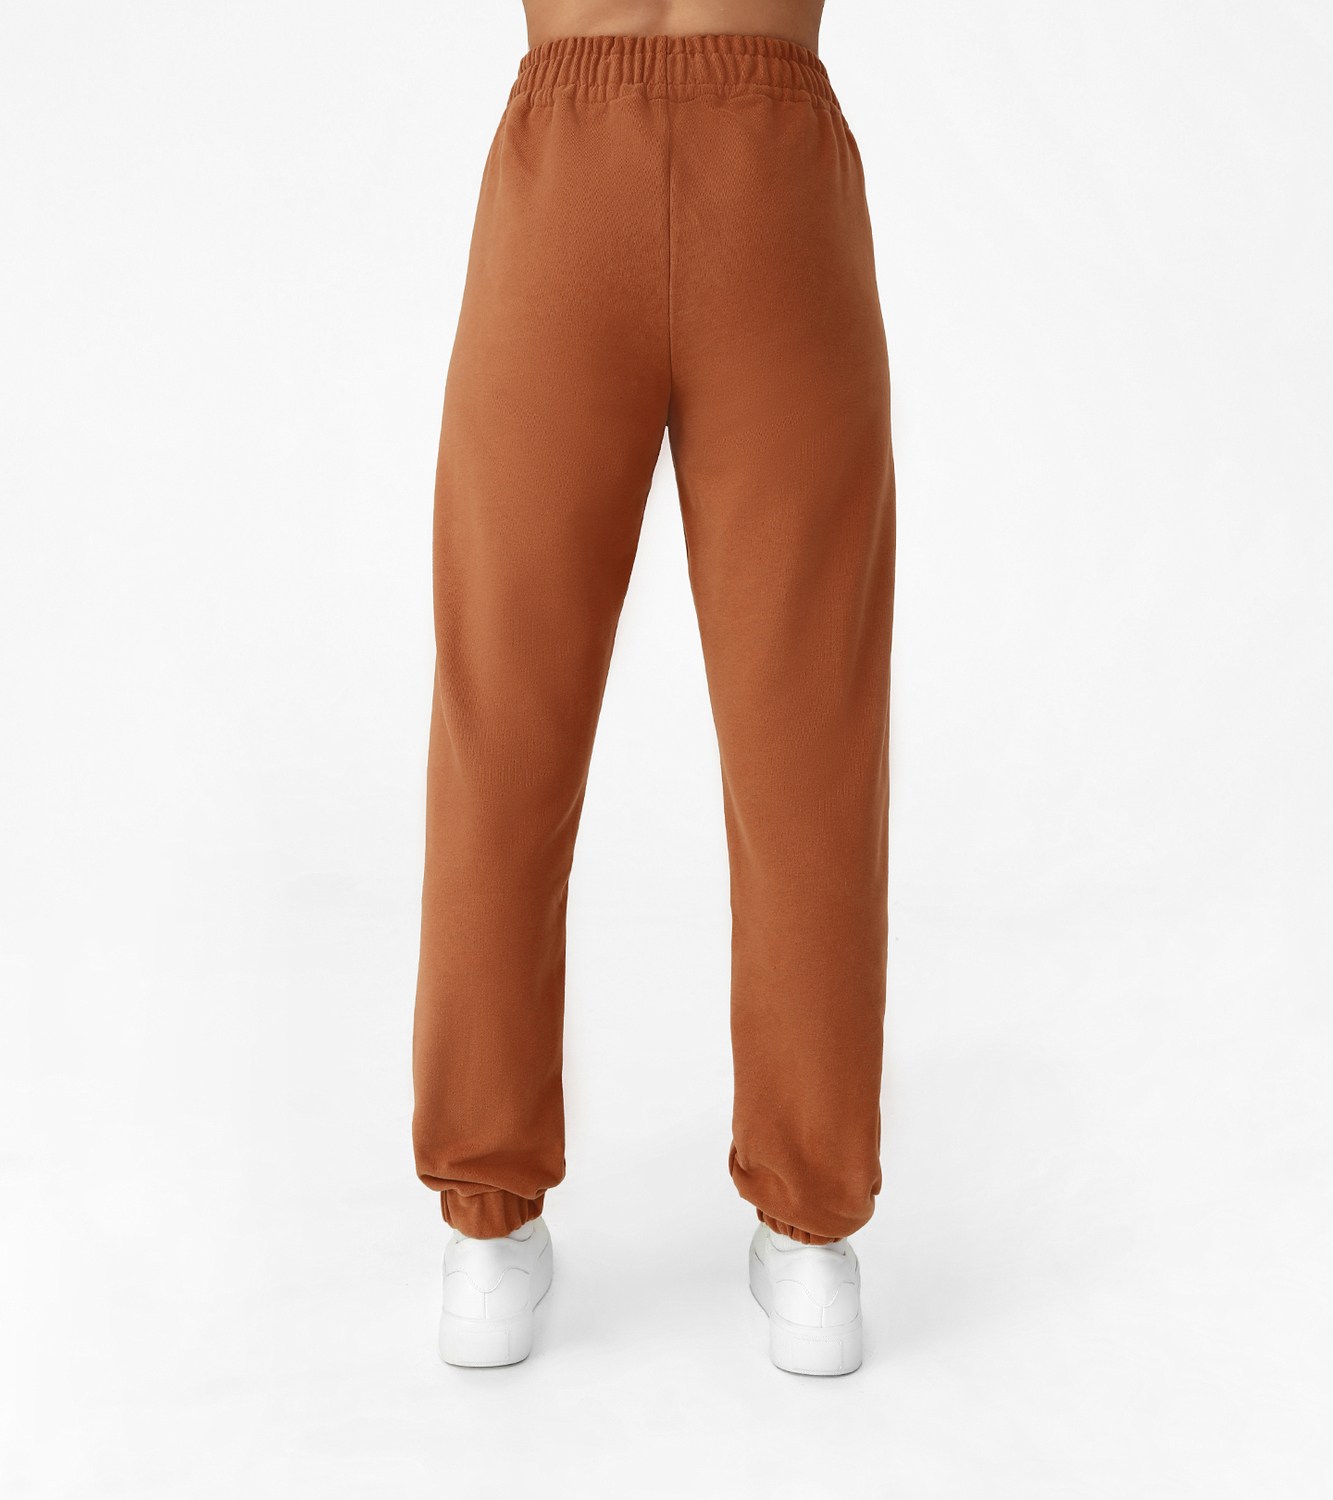 TRACK PANTS (WOMEN) CLAY BROWN - 3